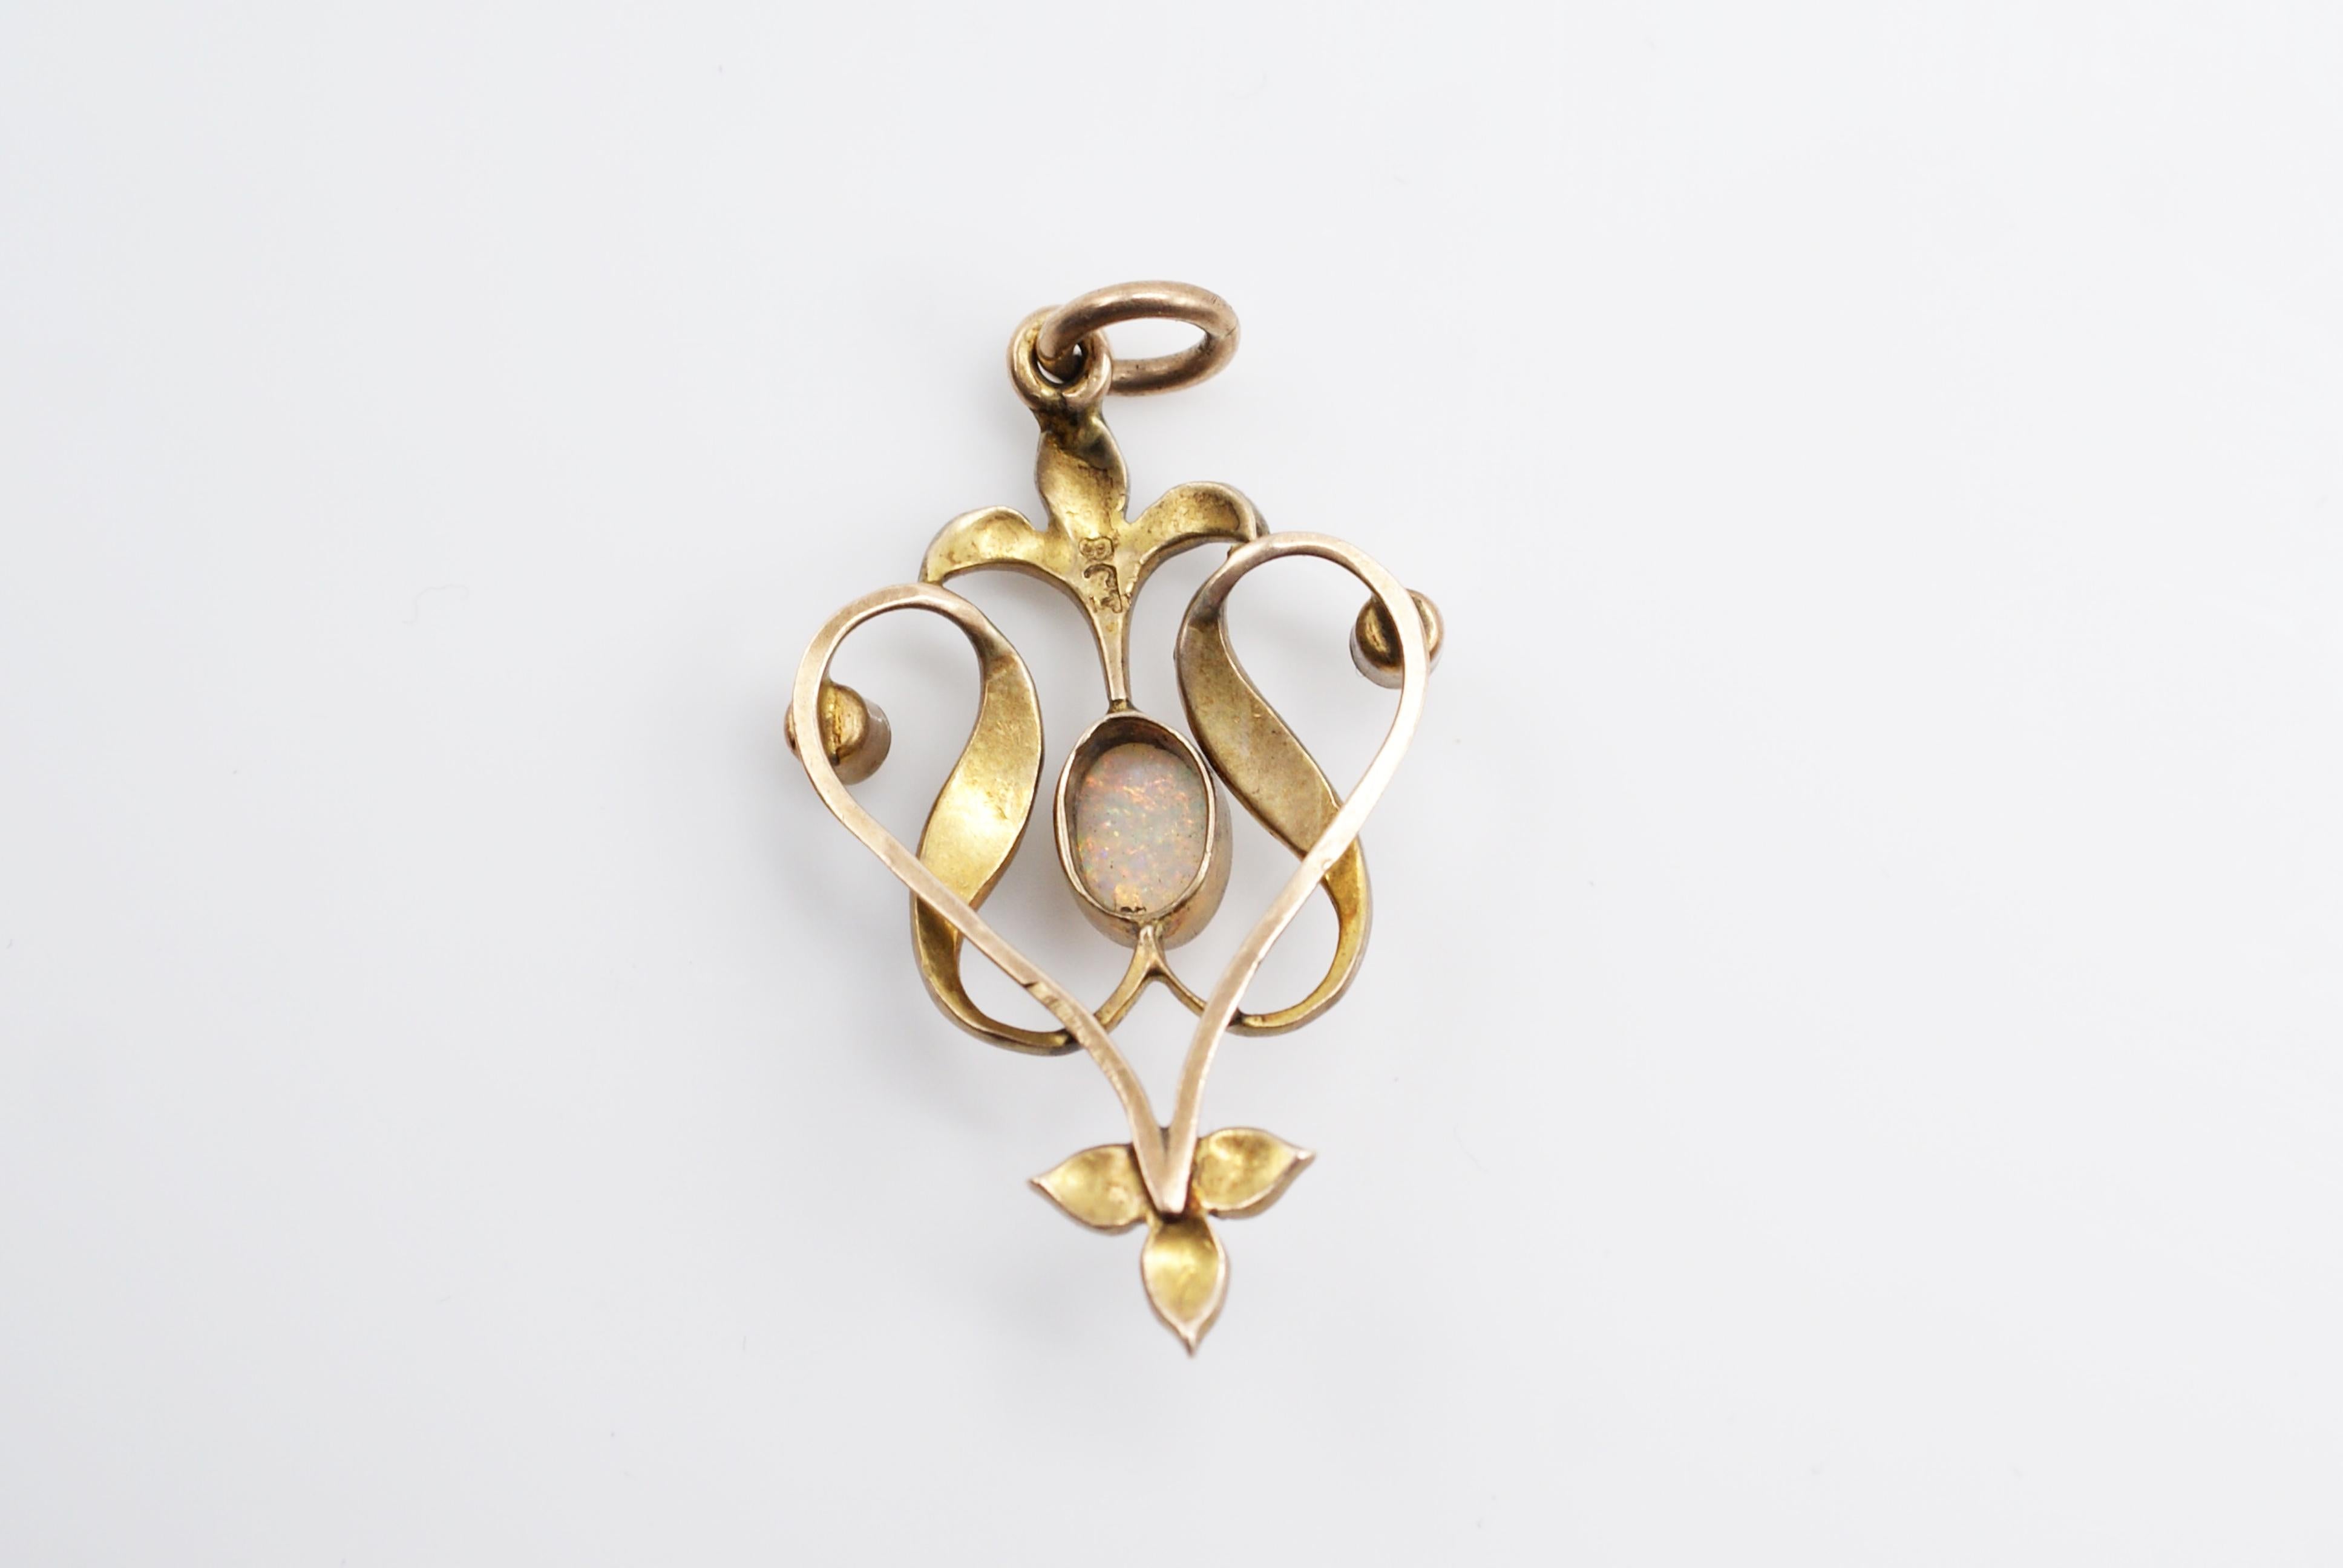 Beautifully handcrafted gold pendant from the turn of the century featuring one oval cabochon opal with amazing patches of red and orange. The flowing design of this pendant typical for this period is further embellished by small white lustrous seed